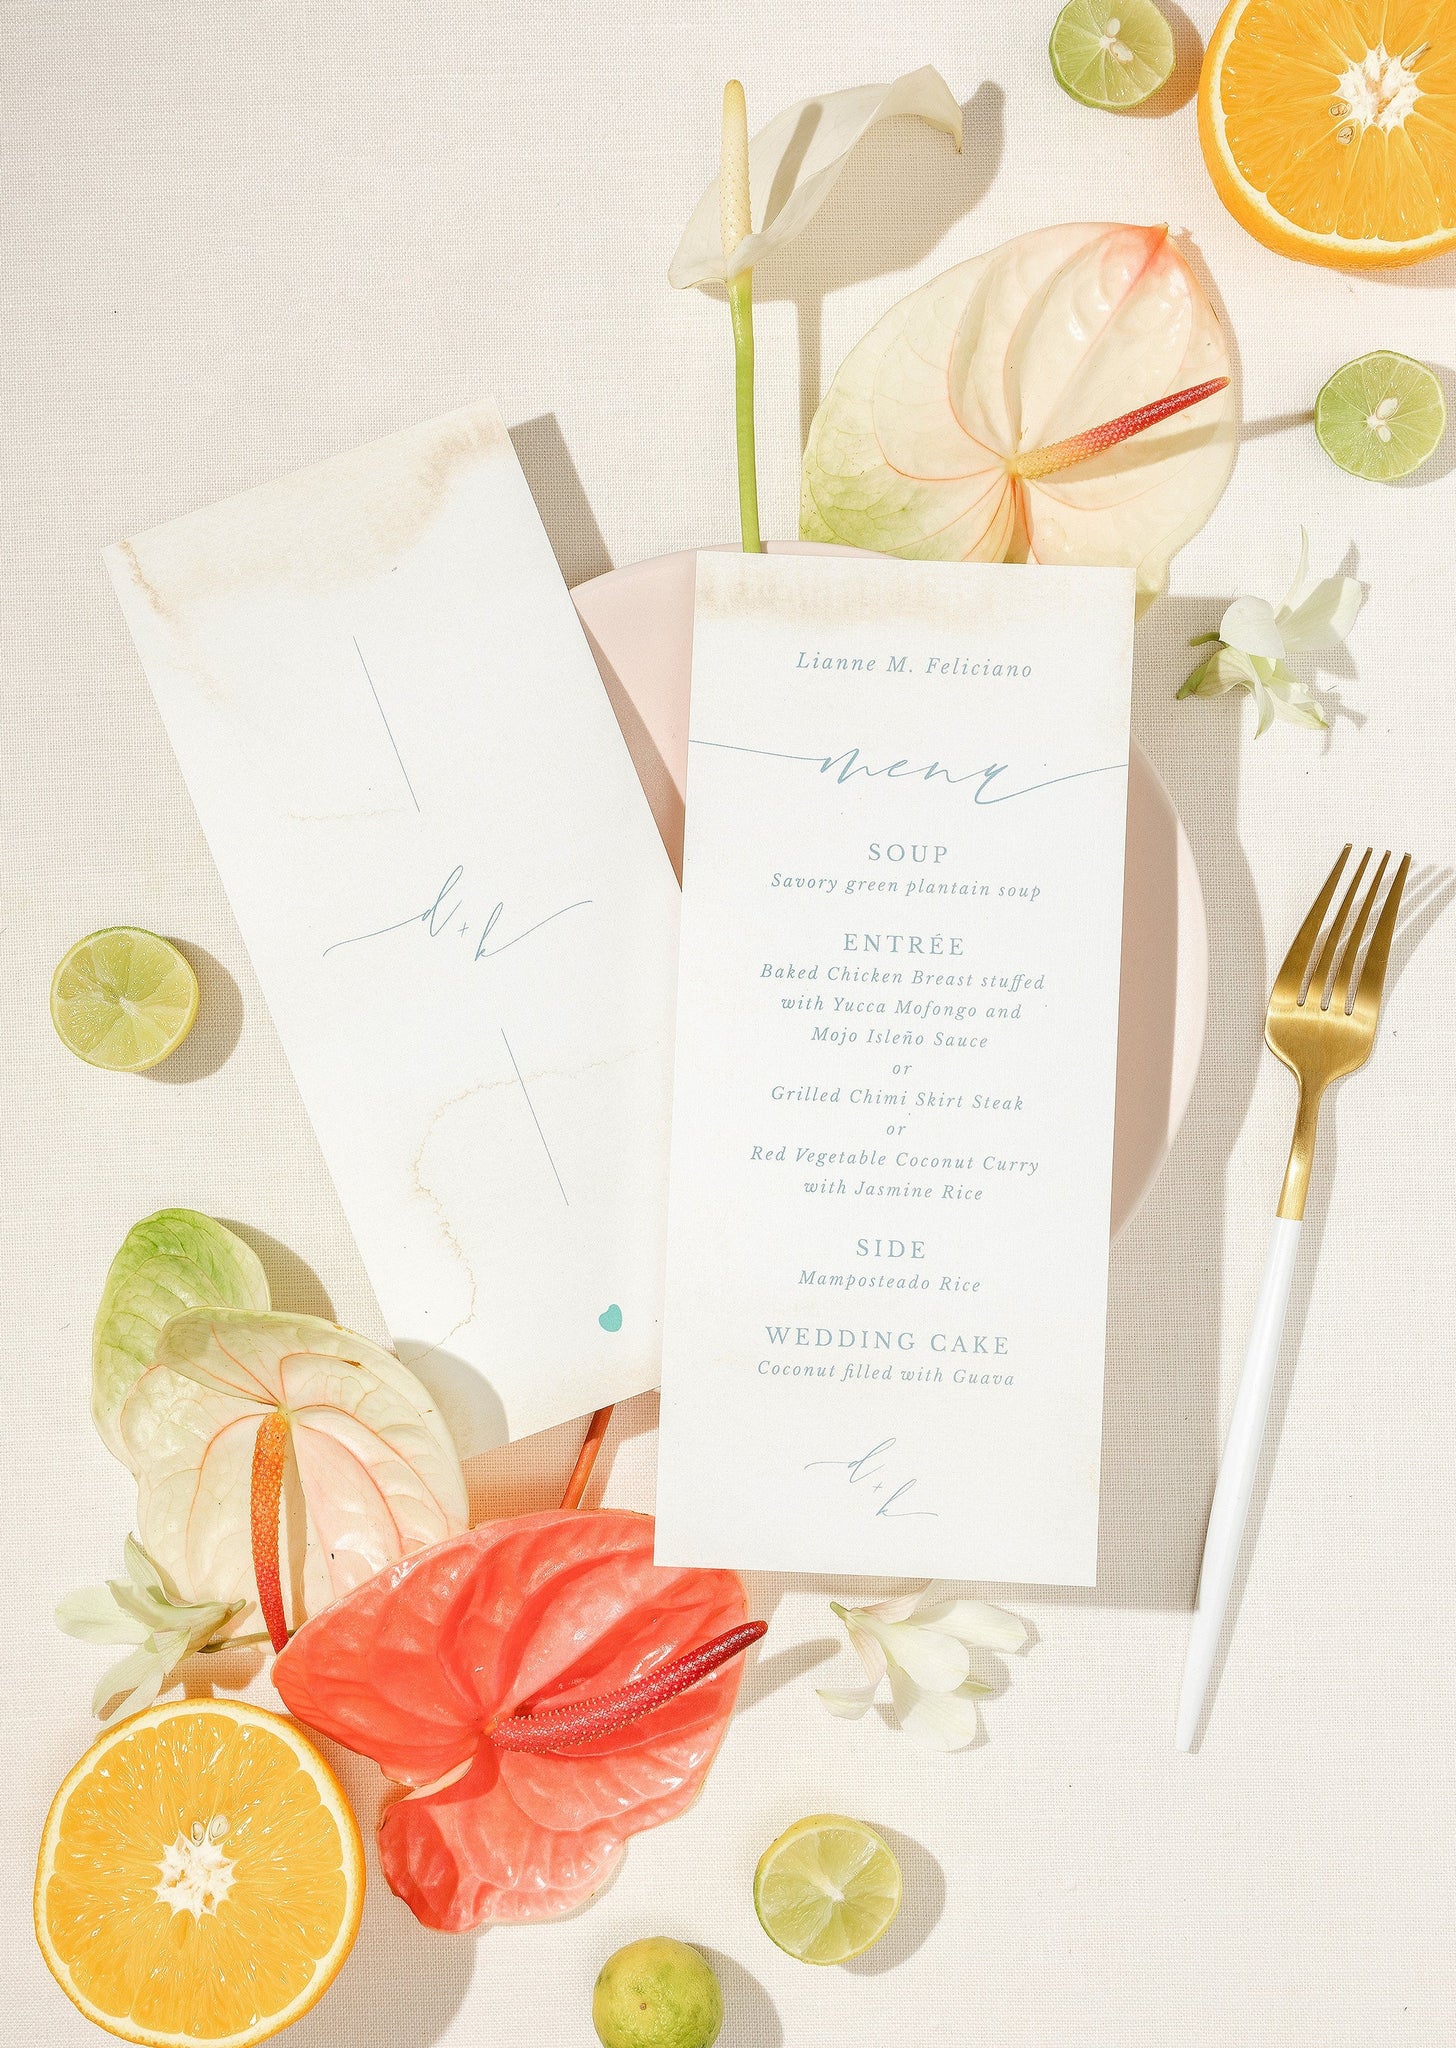 Wedding Dinner Menus with subtle watercolor elements and guest meal options